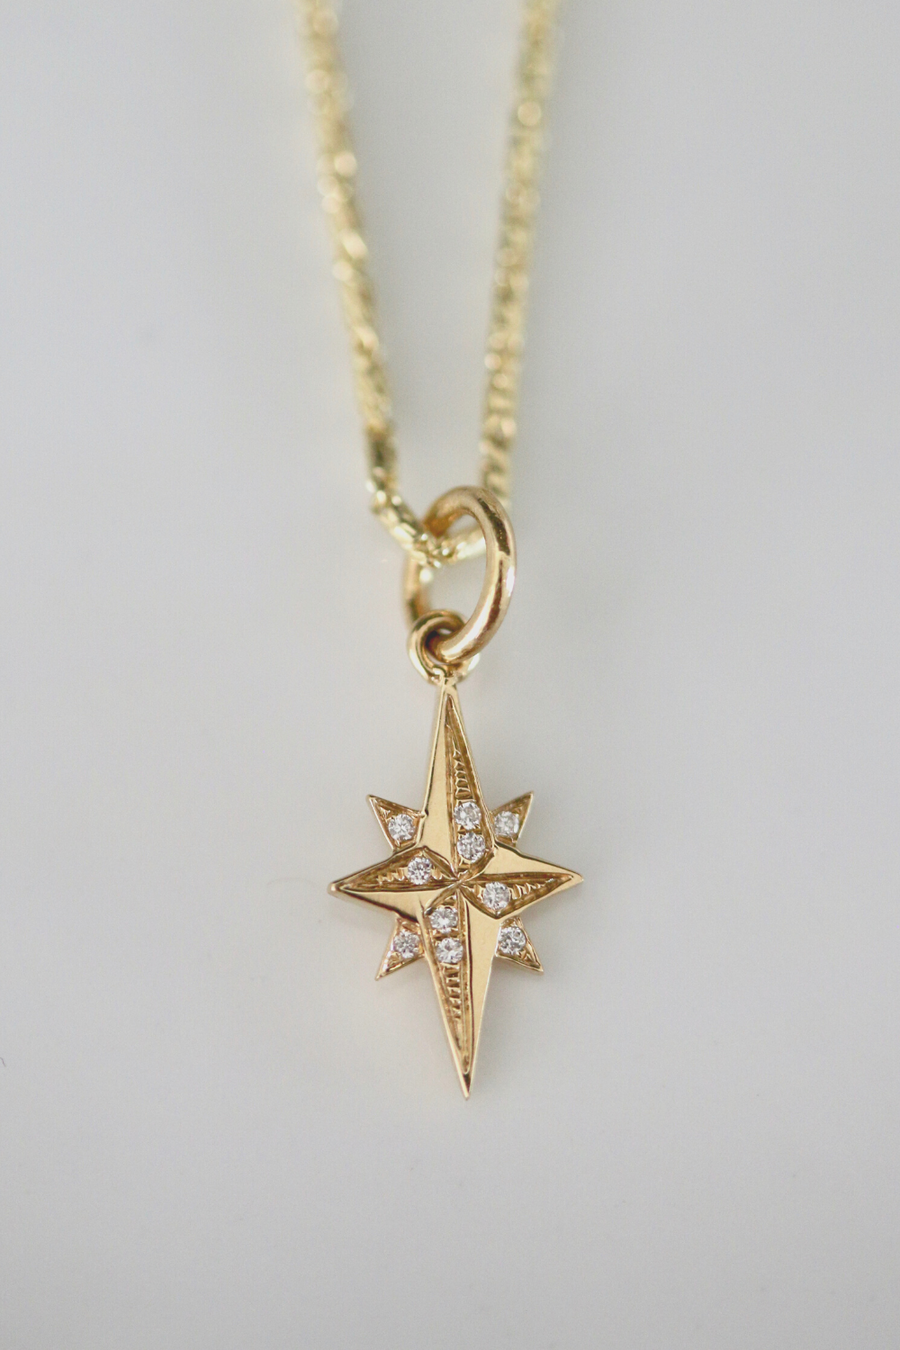 Our Mini Stellar Charm features white diamonds, capturing the brilliance of the stars and adding a touch of celestial glamour to any necklace. The perfect small, yet substantial, gift for someone extra special.